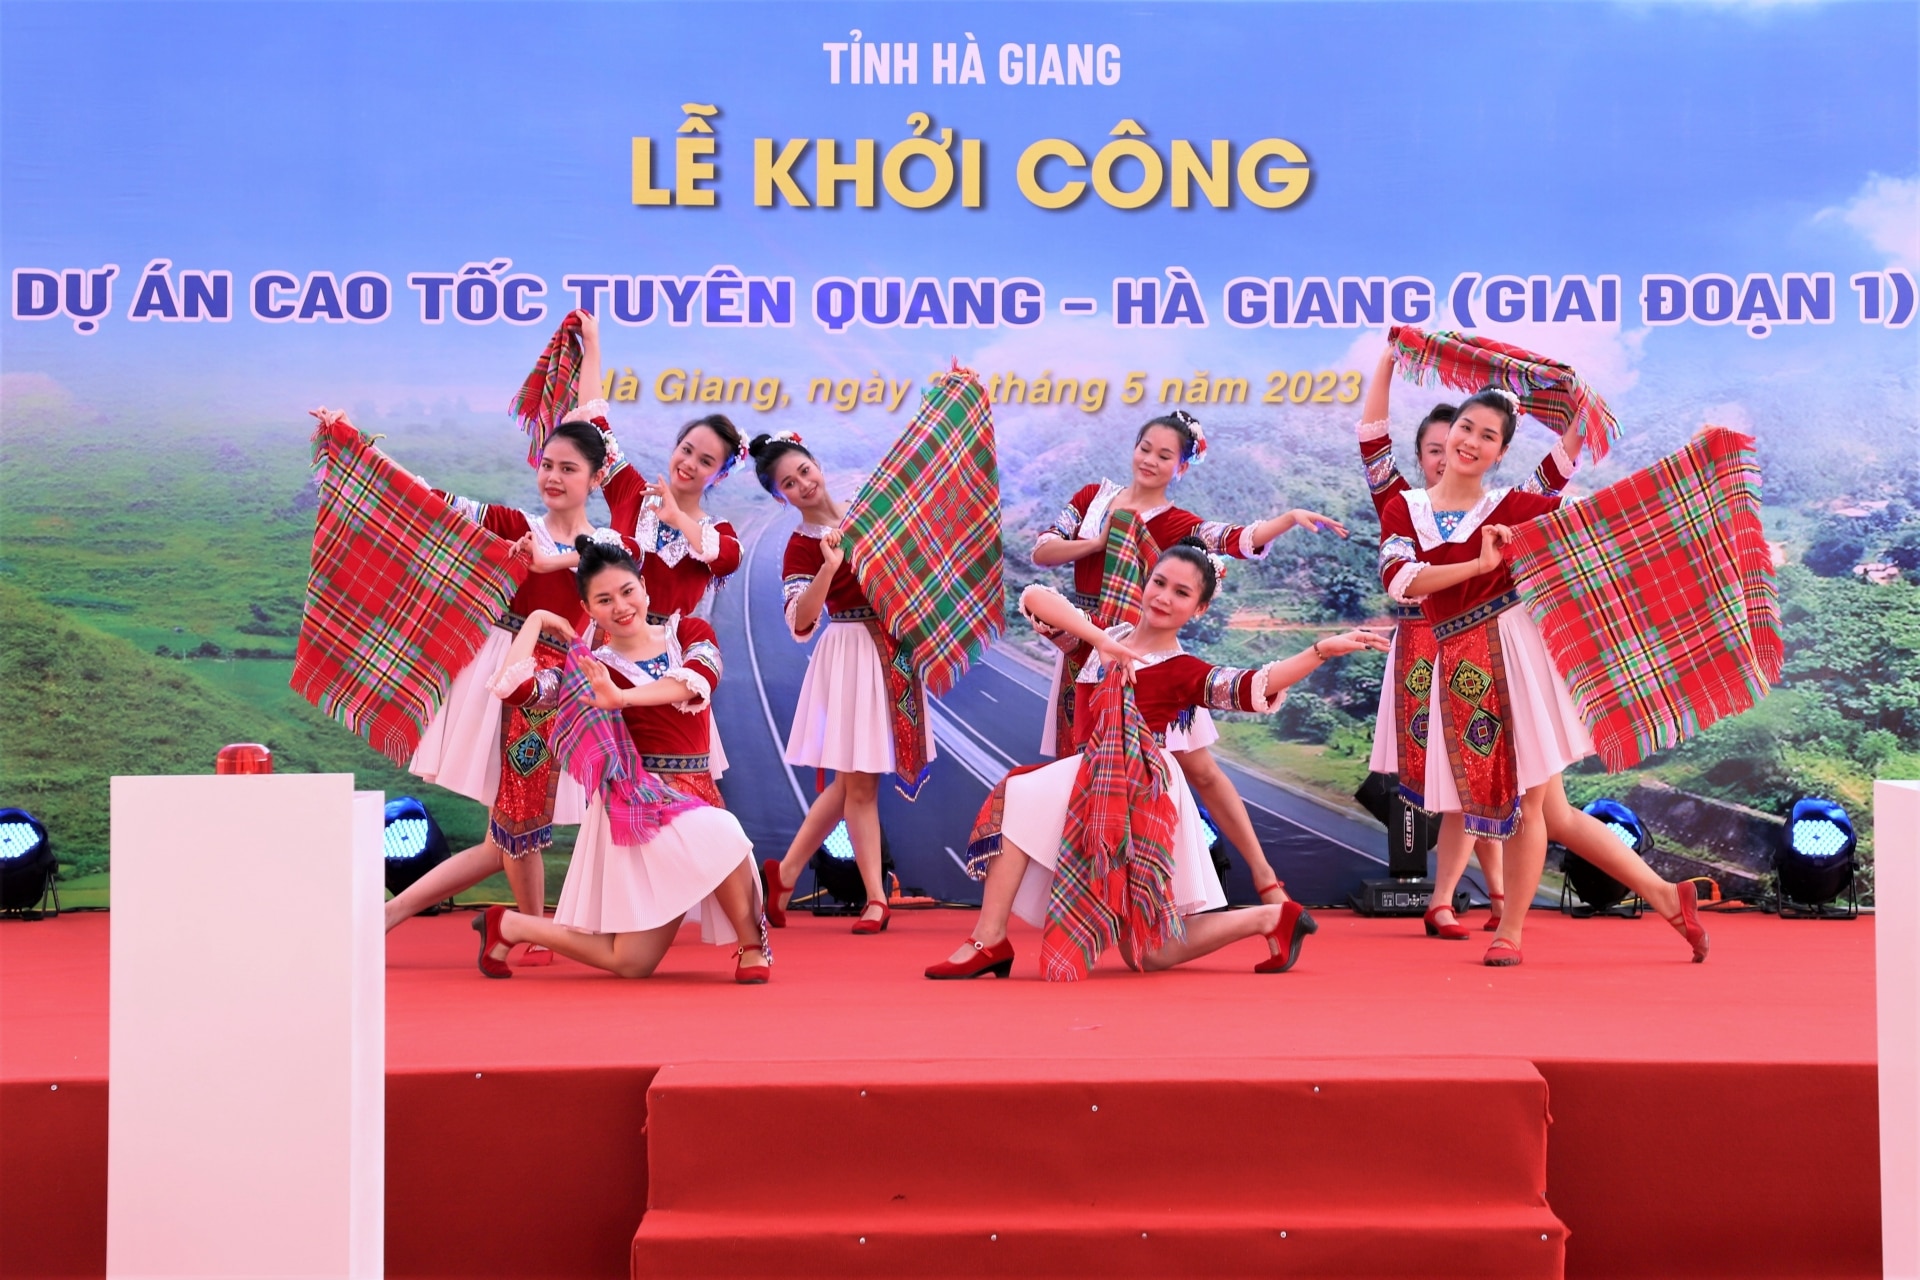 Commencement of Tuyen Quang - Ha Giang expressway project (phase 1 ...